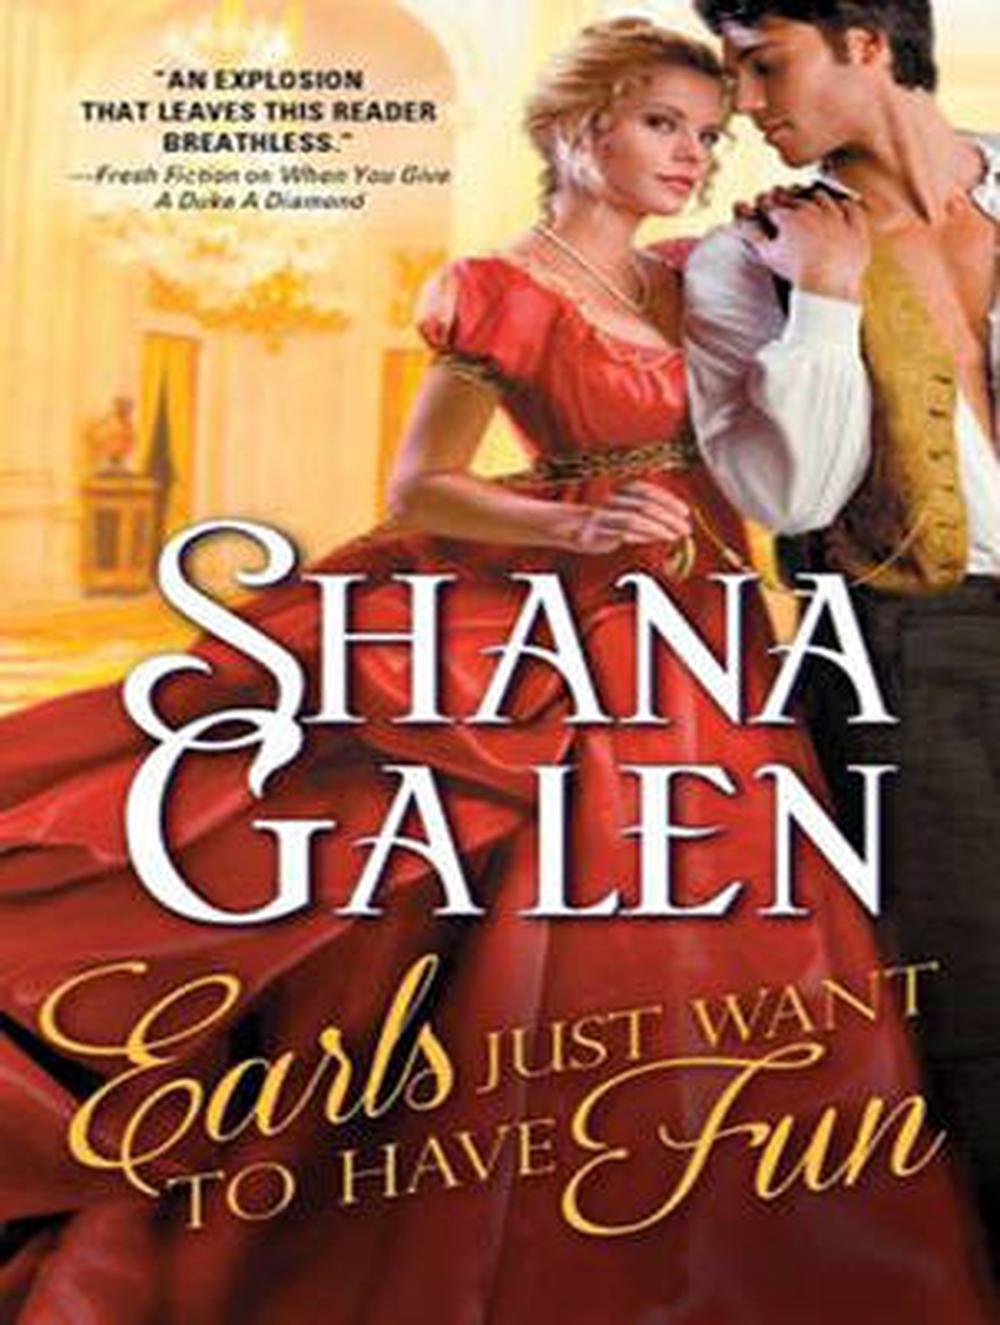 Earls Just Want to Have Fun by Shana Galen